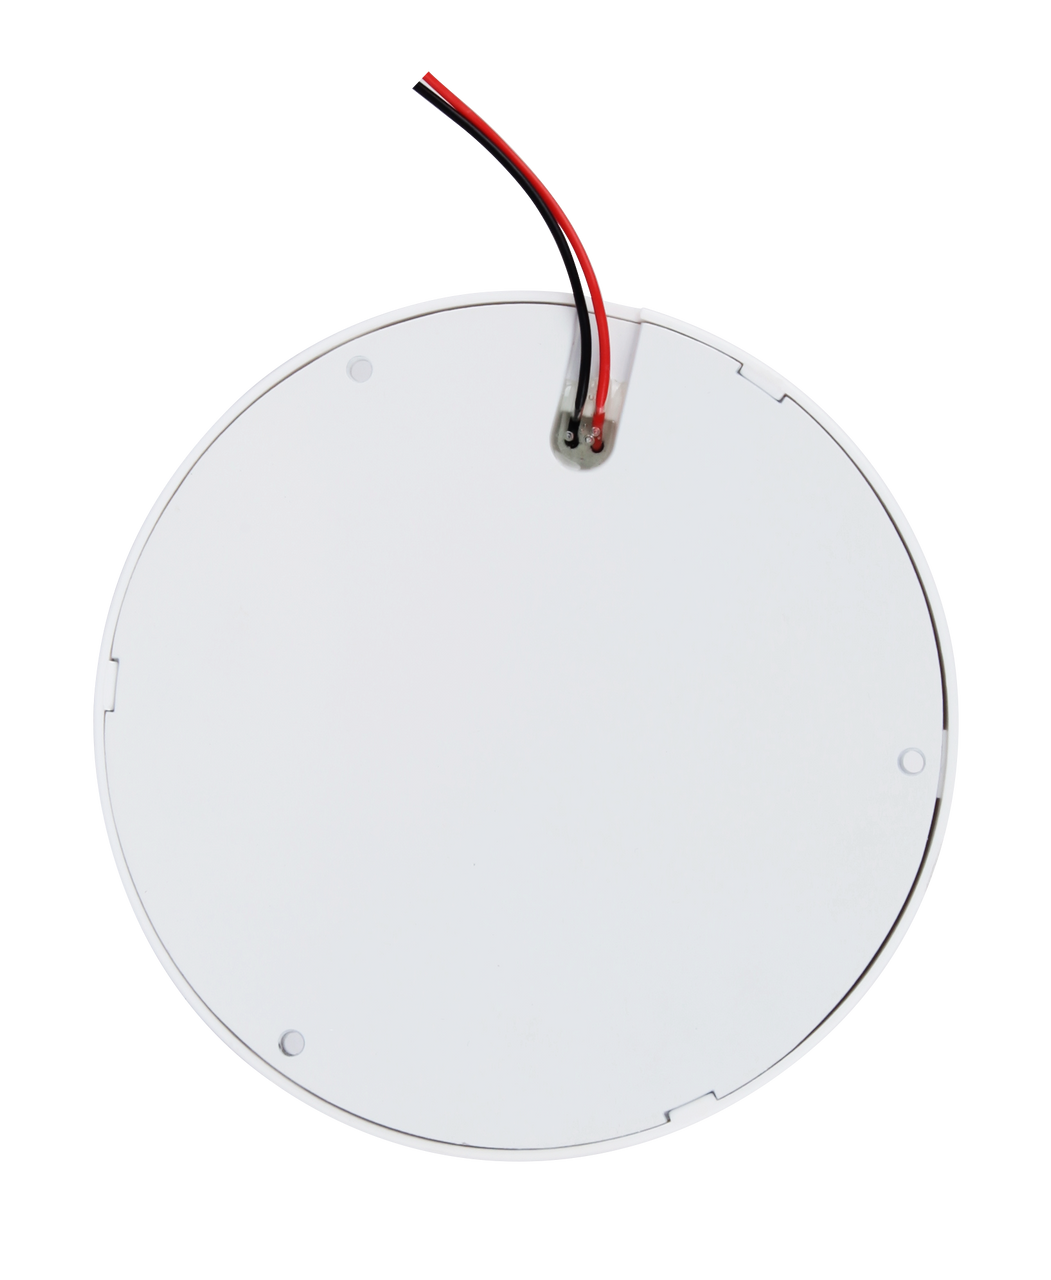 13118WM -  Interior, Exterior Light Surface Mount. Water Proof Design. Low Profile Design. 2 Year Warranty. Warm White. Autolamps.  Ultimate LED.